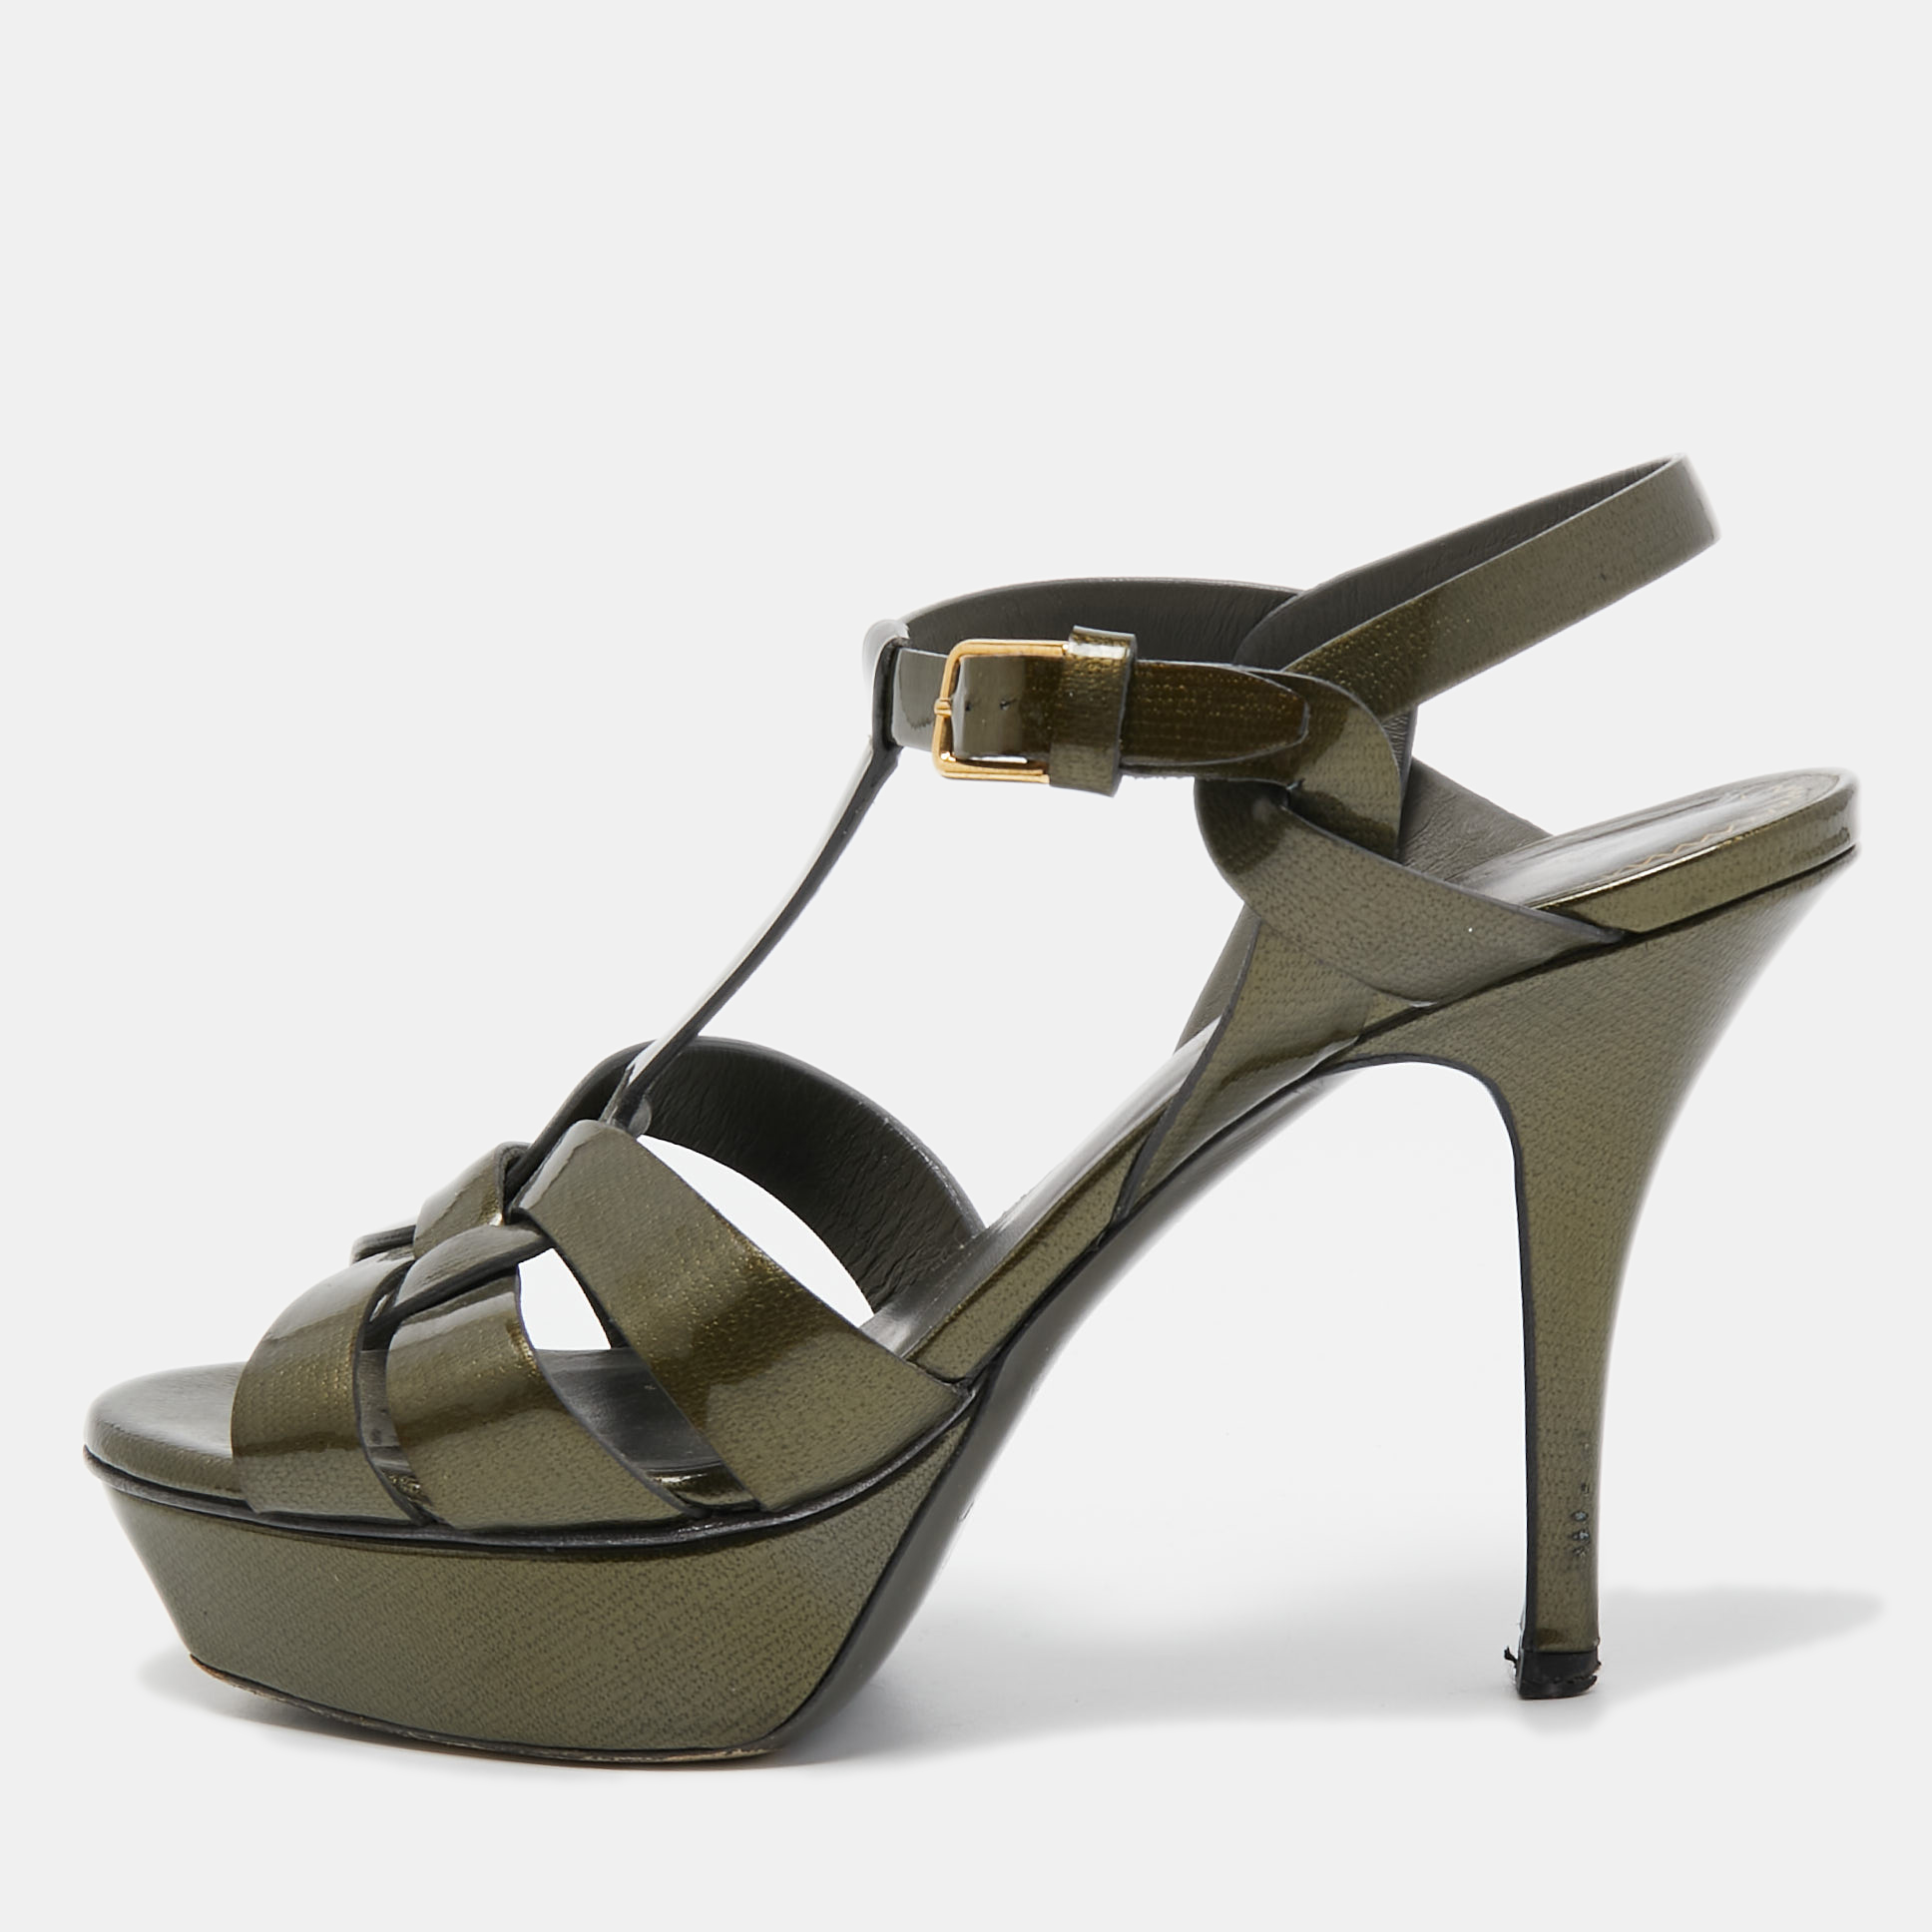 Yves Saint Laurent Olive Green Patent Leather Tribute Sandals Size 36